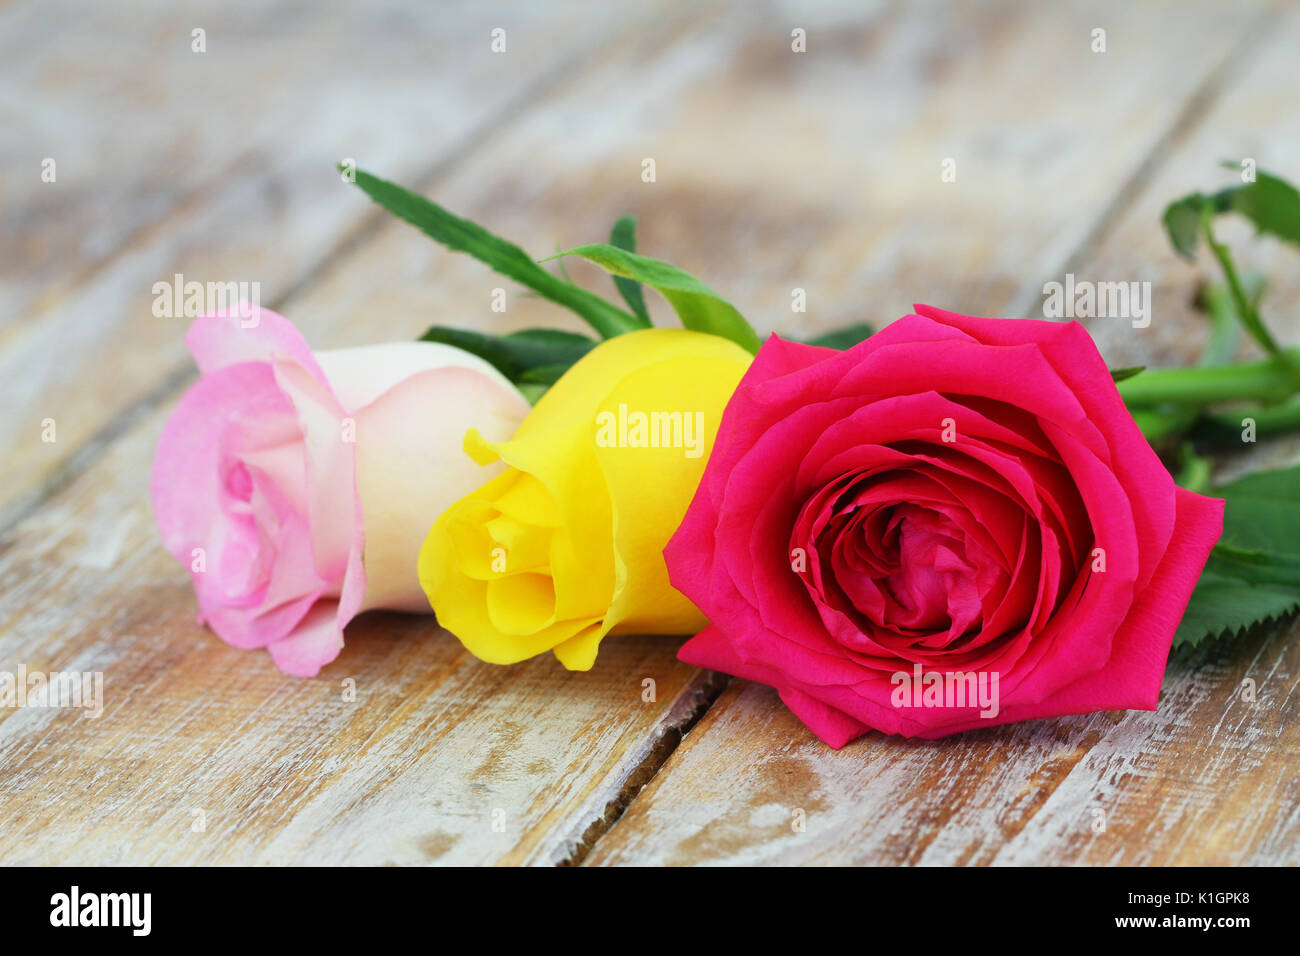 Three colorful roses on rustic wooden surface with copy space Stock Photo